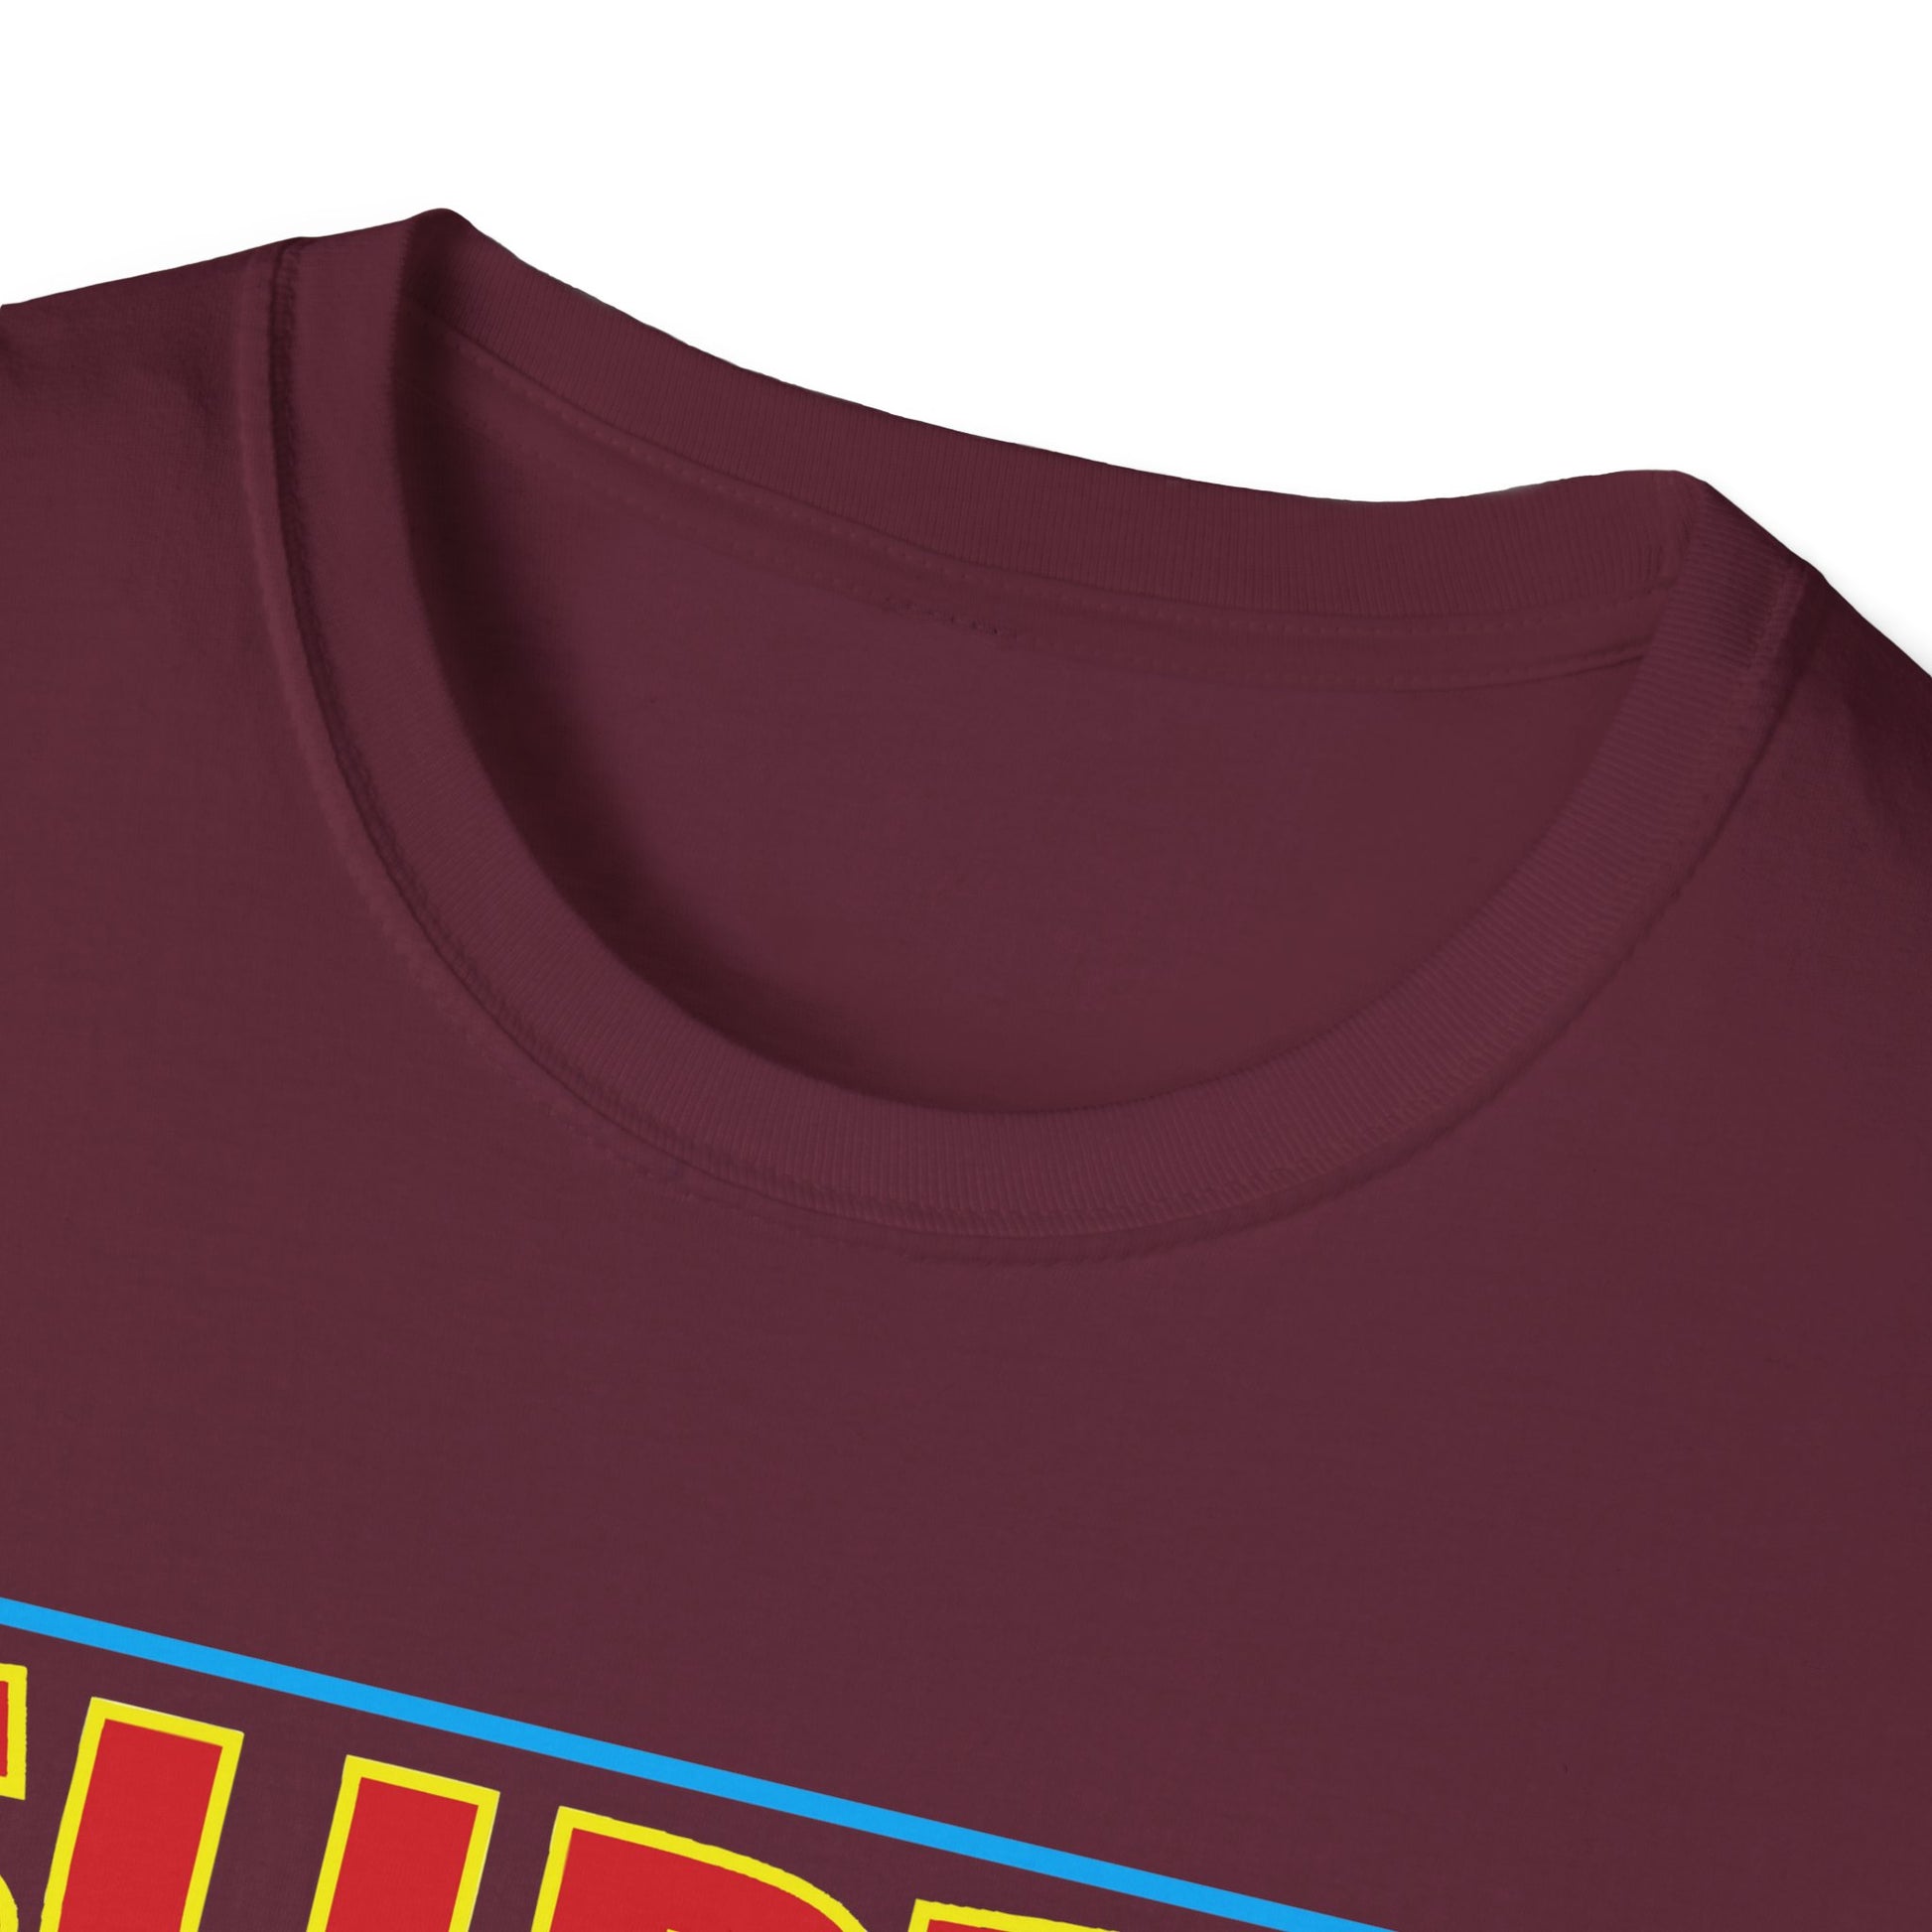 Close-up of a maroon Unisex Softstyle Logo T-Shirt with a round neckline, partially showing a bright yellow print with Toronto, cabbagetown, and blue and red details on the chest by Printify.